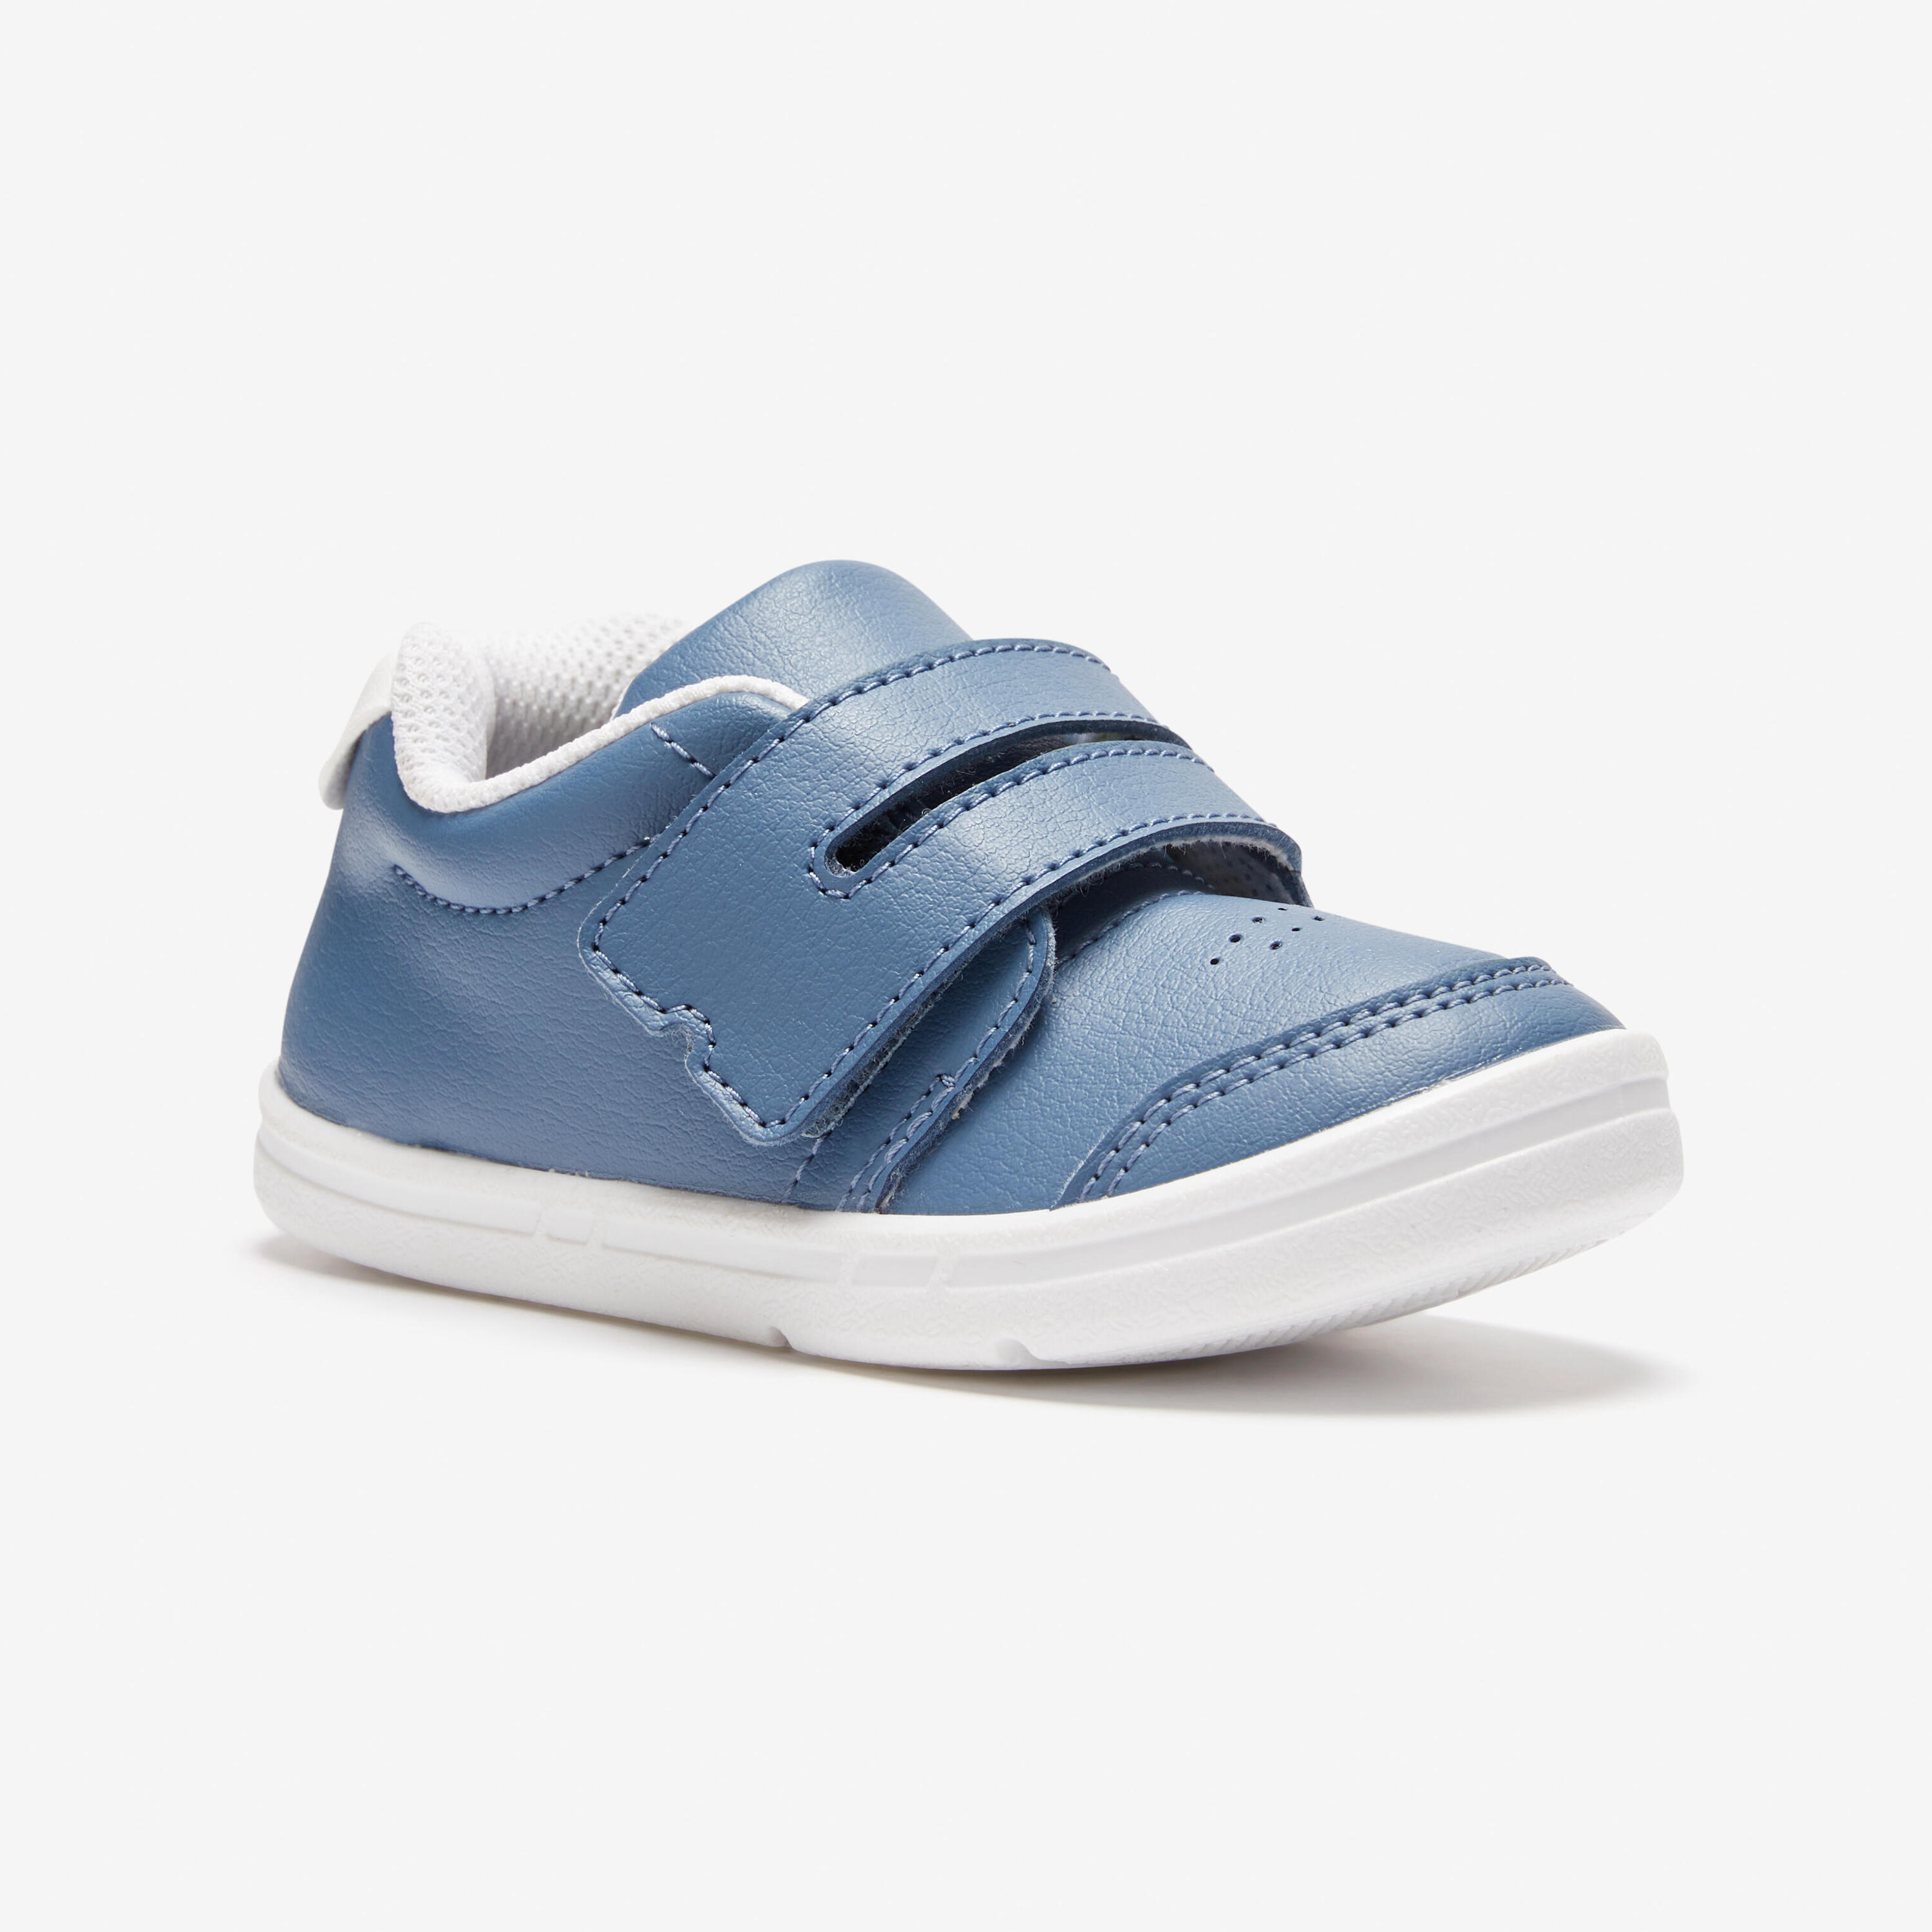 Kids' Rip-Tab First Step Shoes Size 3.5C to 6.5C I Learn 1/7